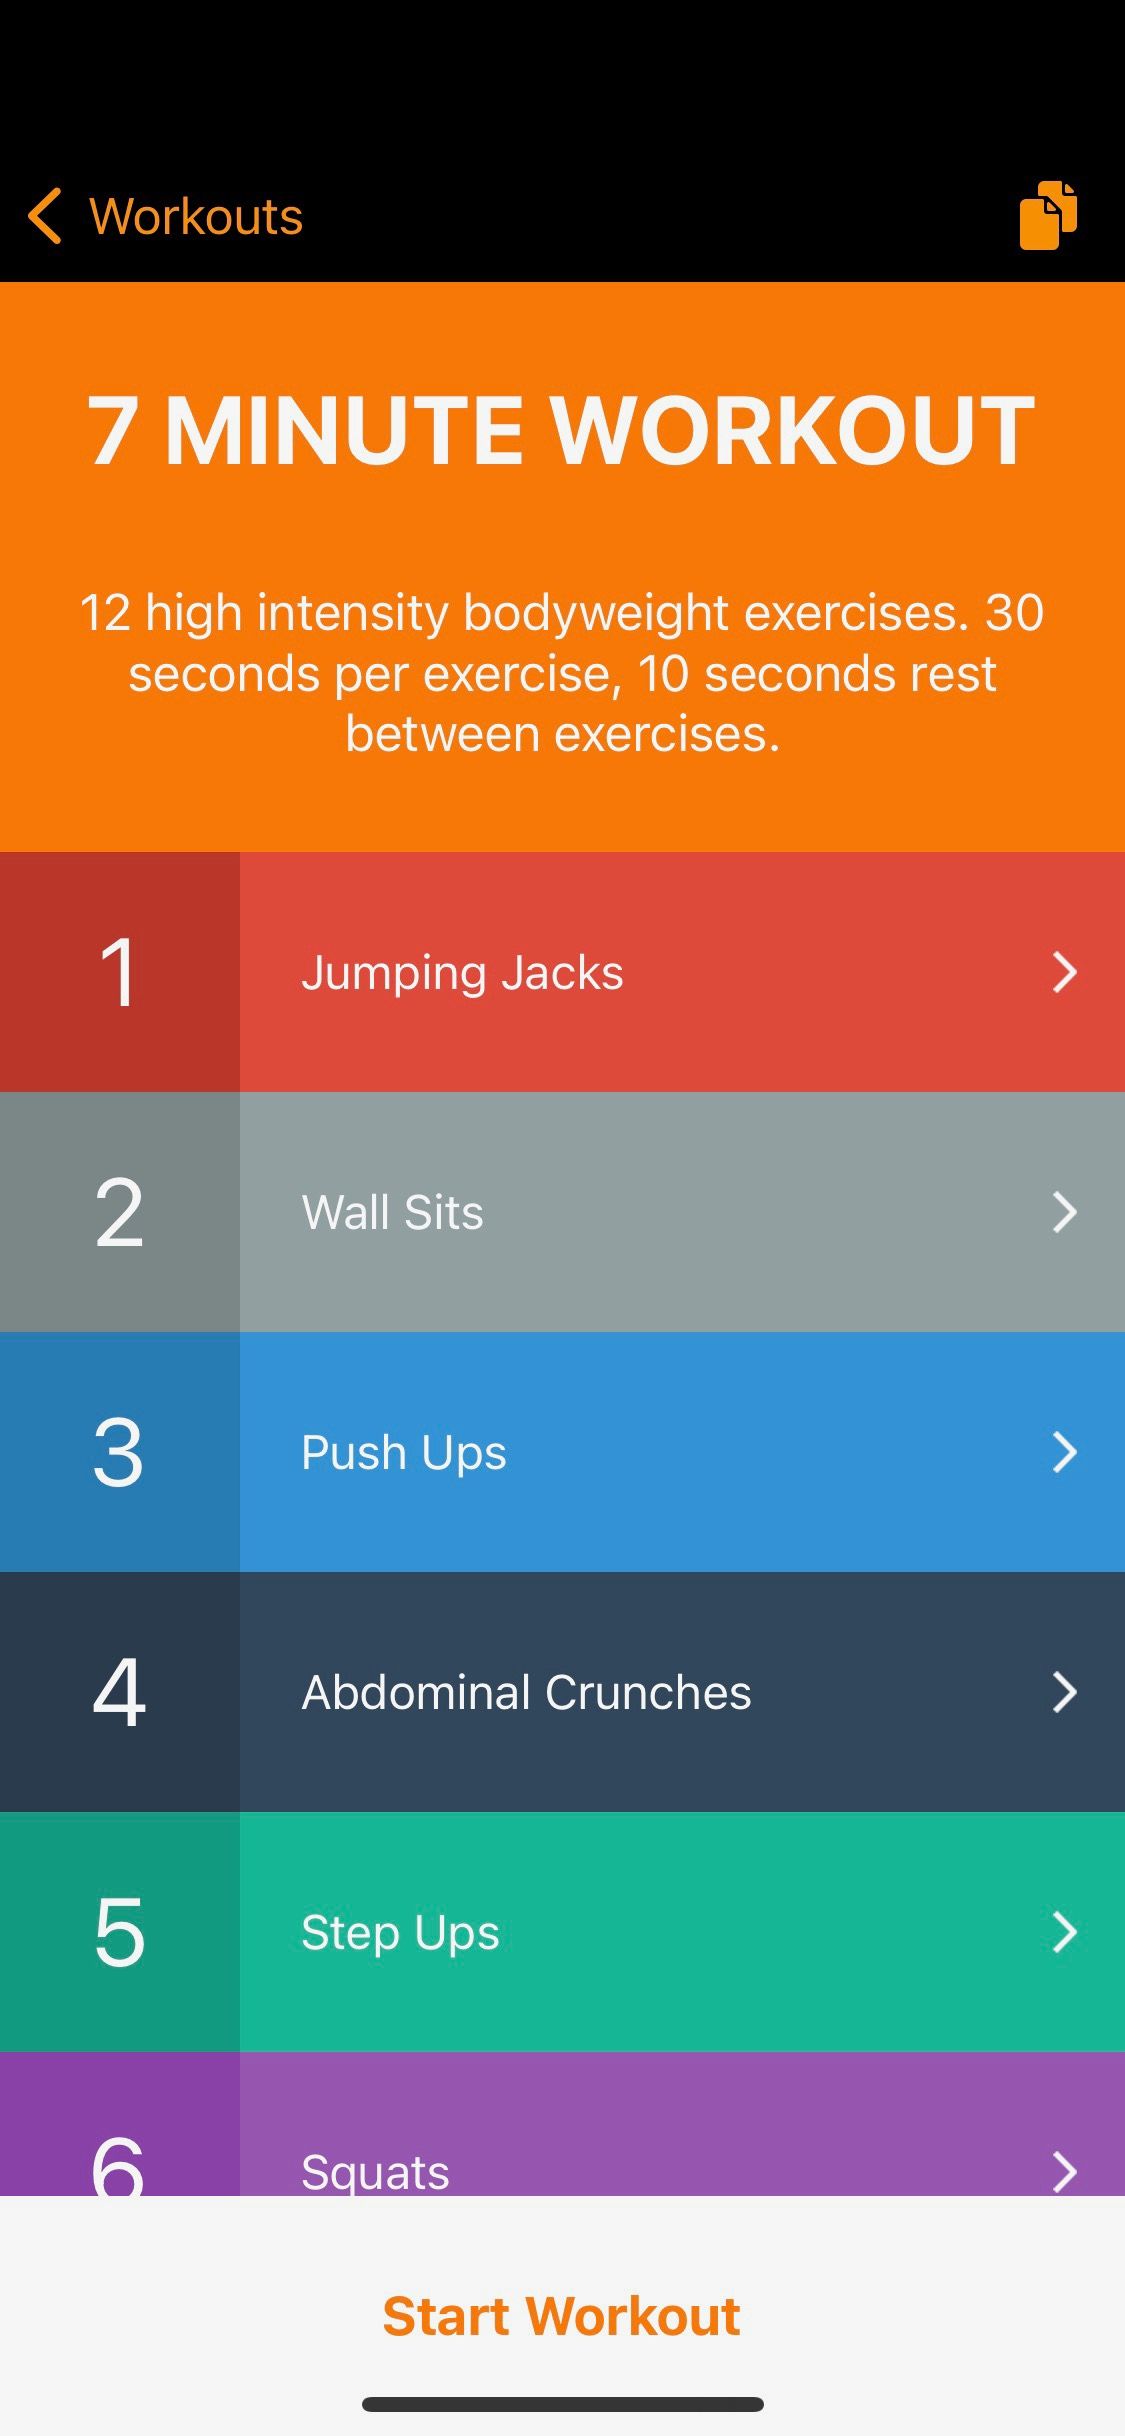 Screenshot of 7 Minute Workout app showing exercises within a workout